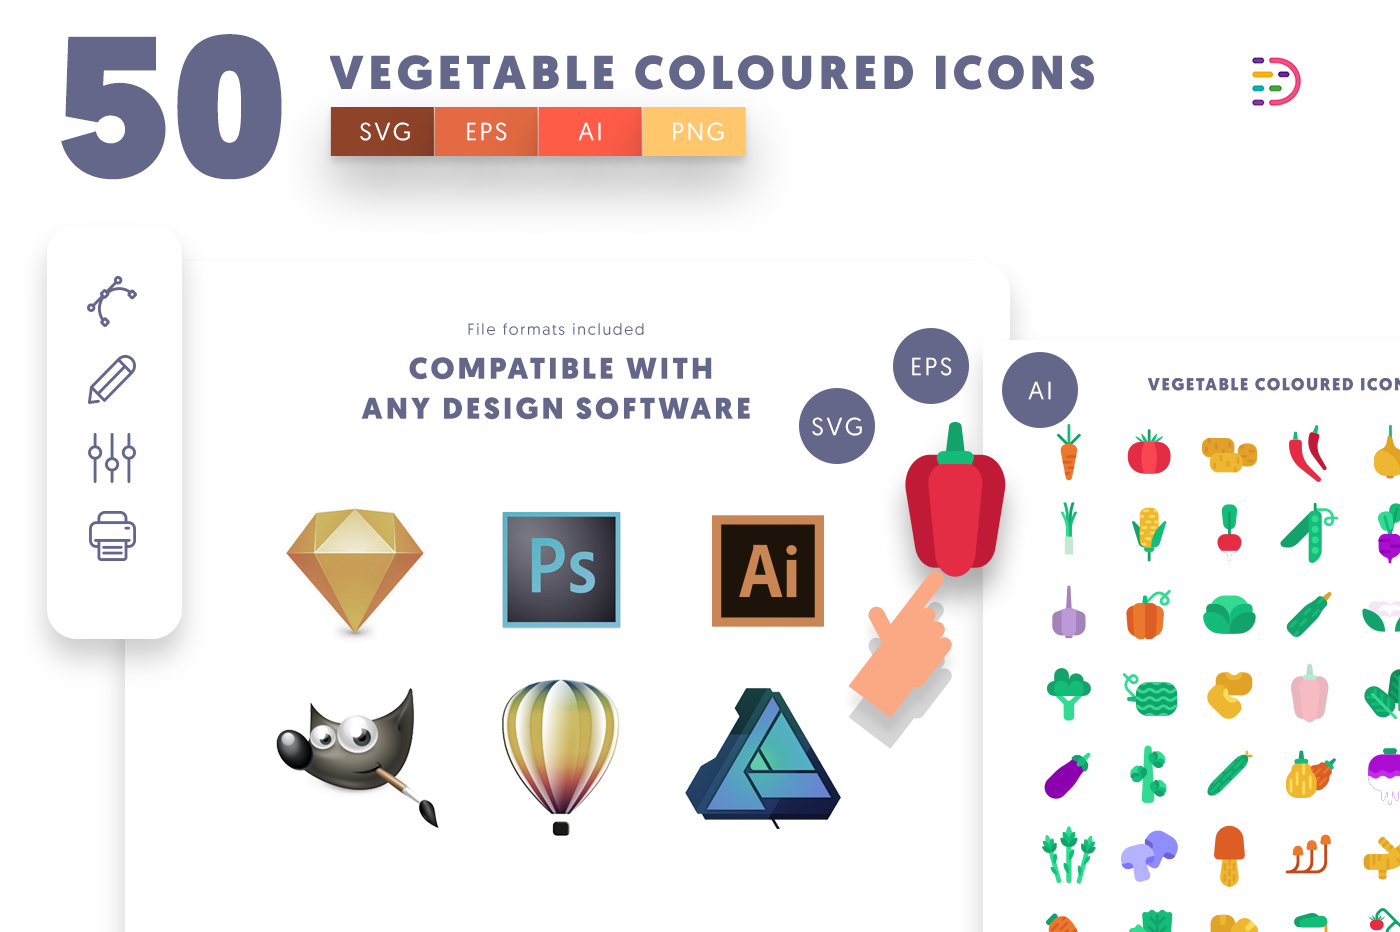  full vector 50 Vegetable Coloured Icons EPS, SVG, PNG